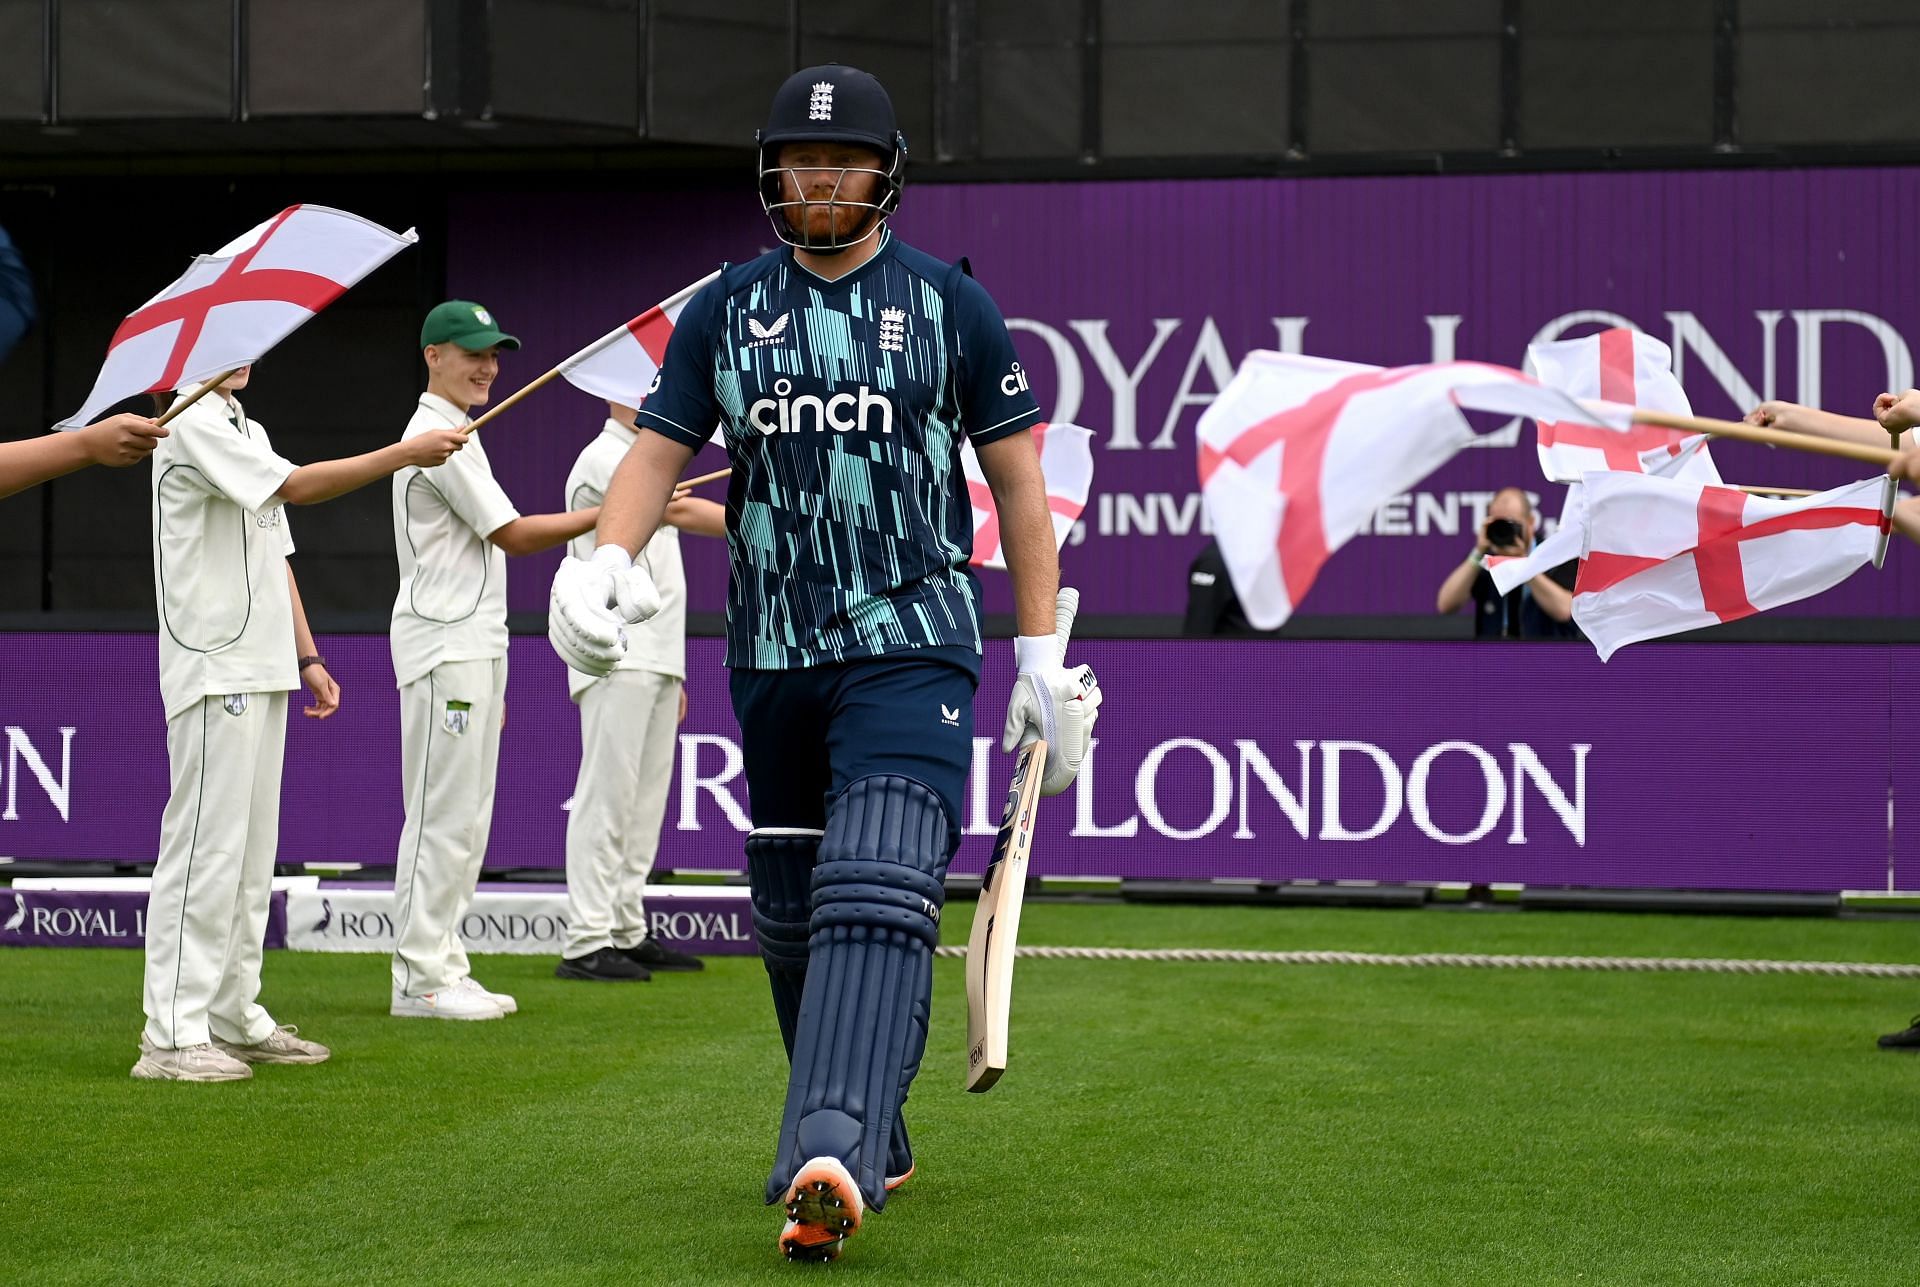 England v South Africa - 2nd Royal London Series One Day International (Image Courtesy: Getty Images)